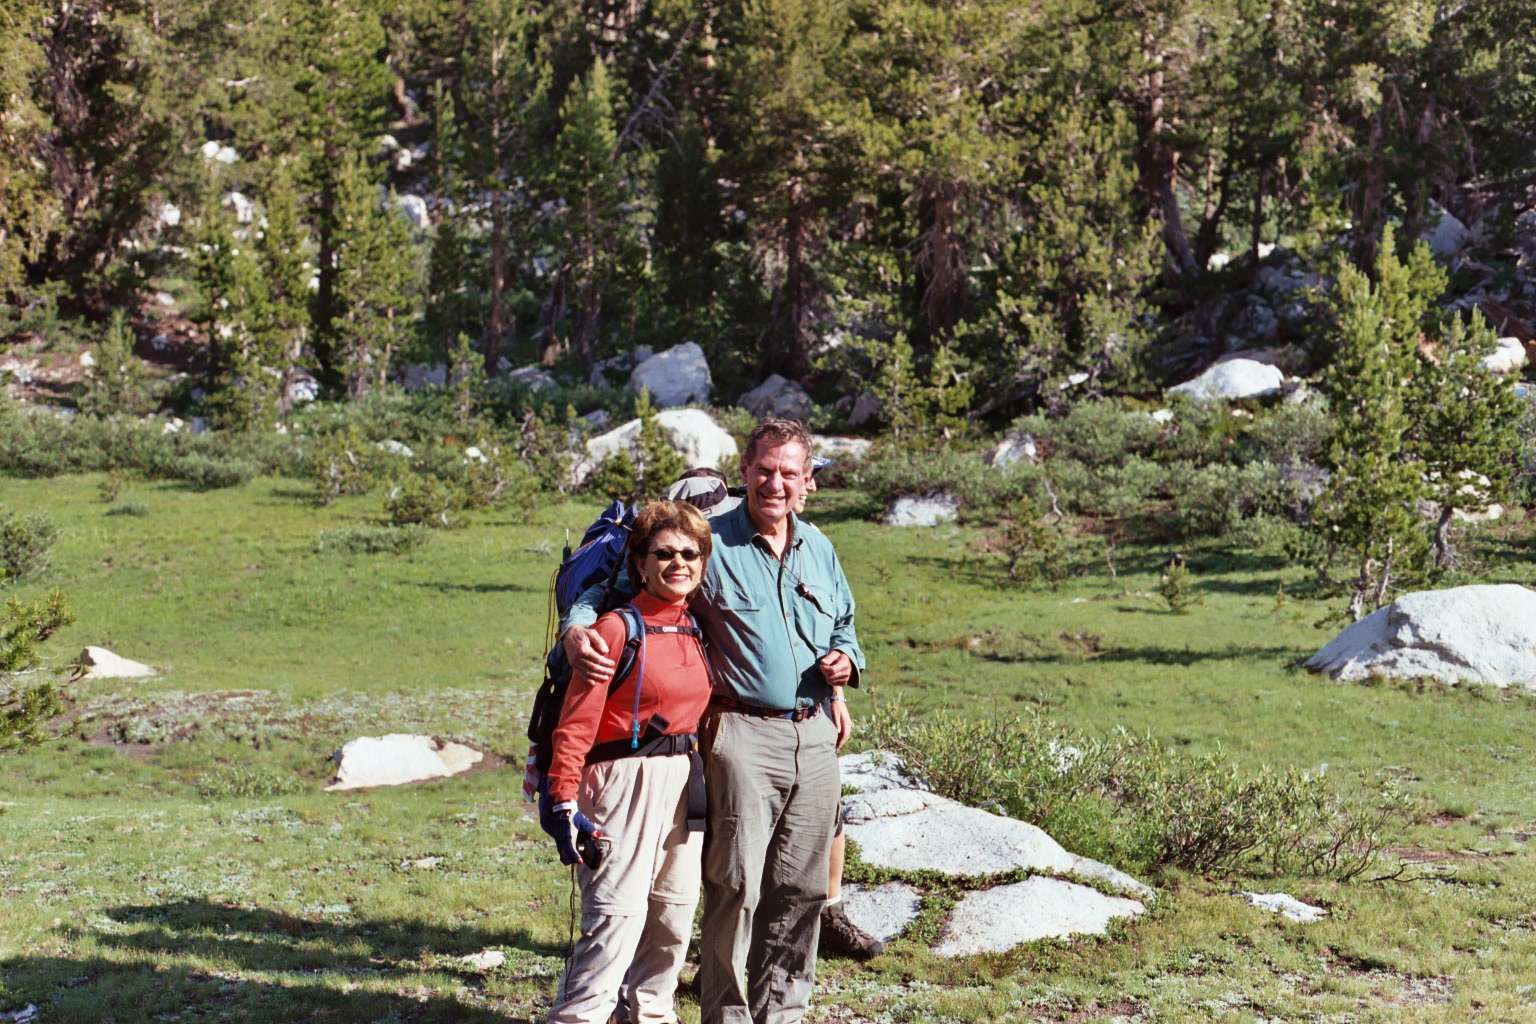 A smiling George and
Zo in the meadow.